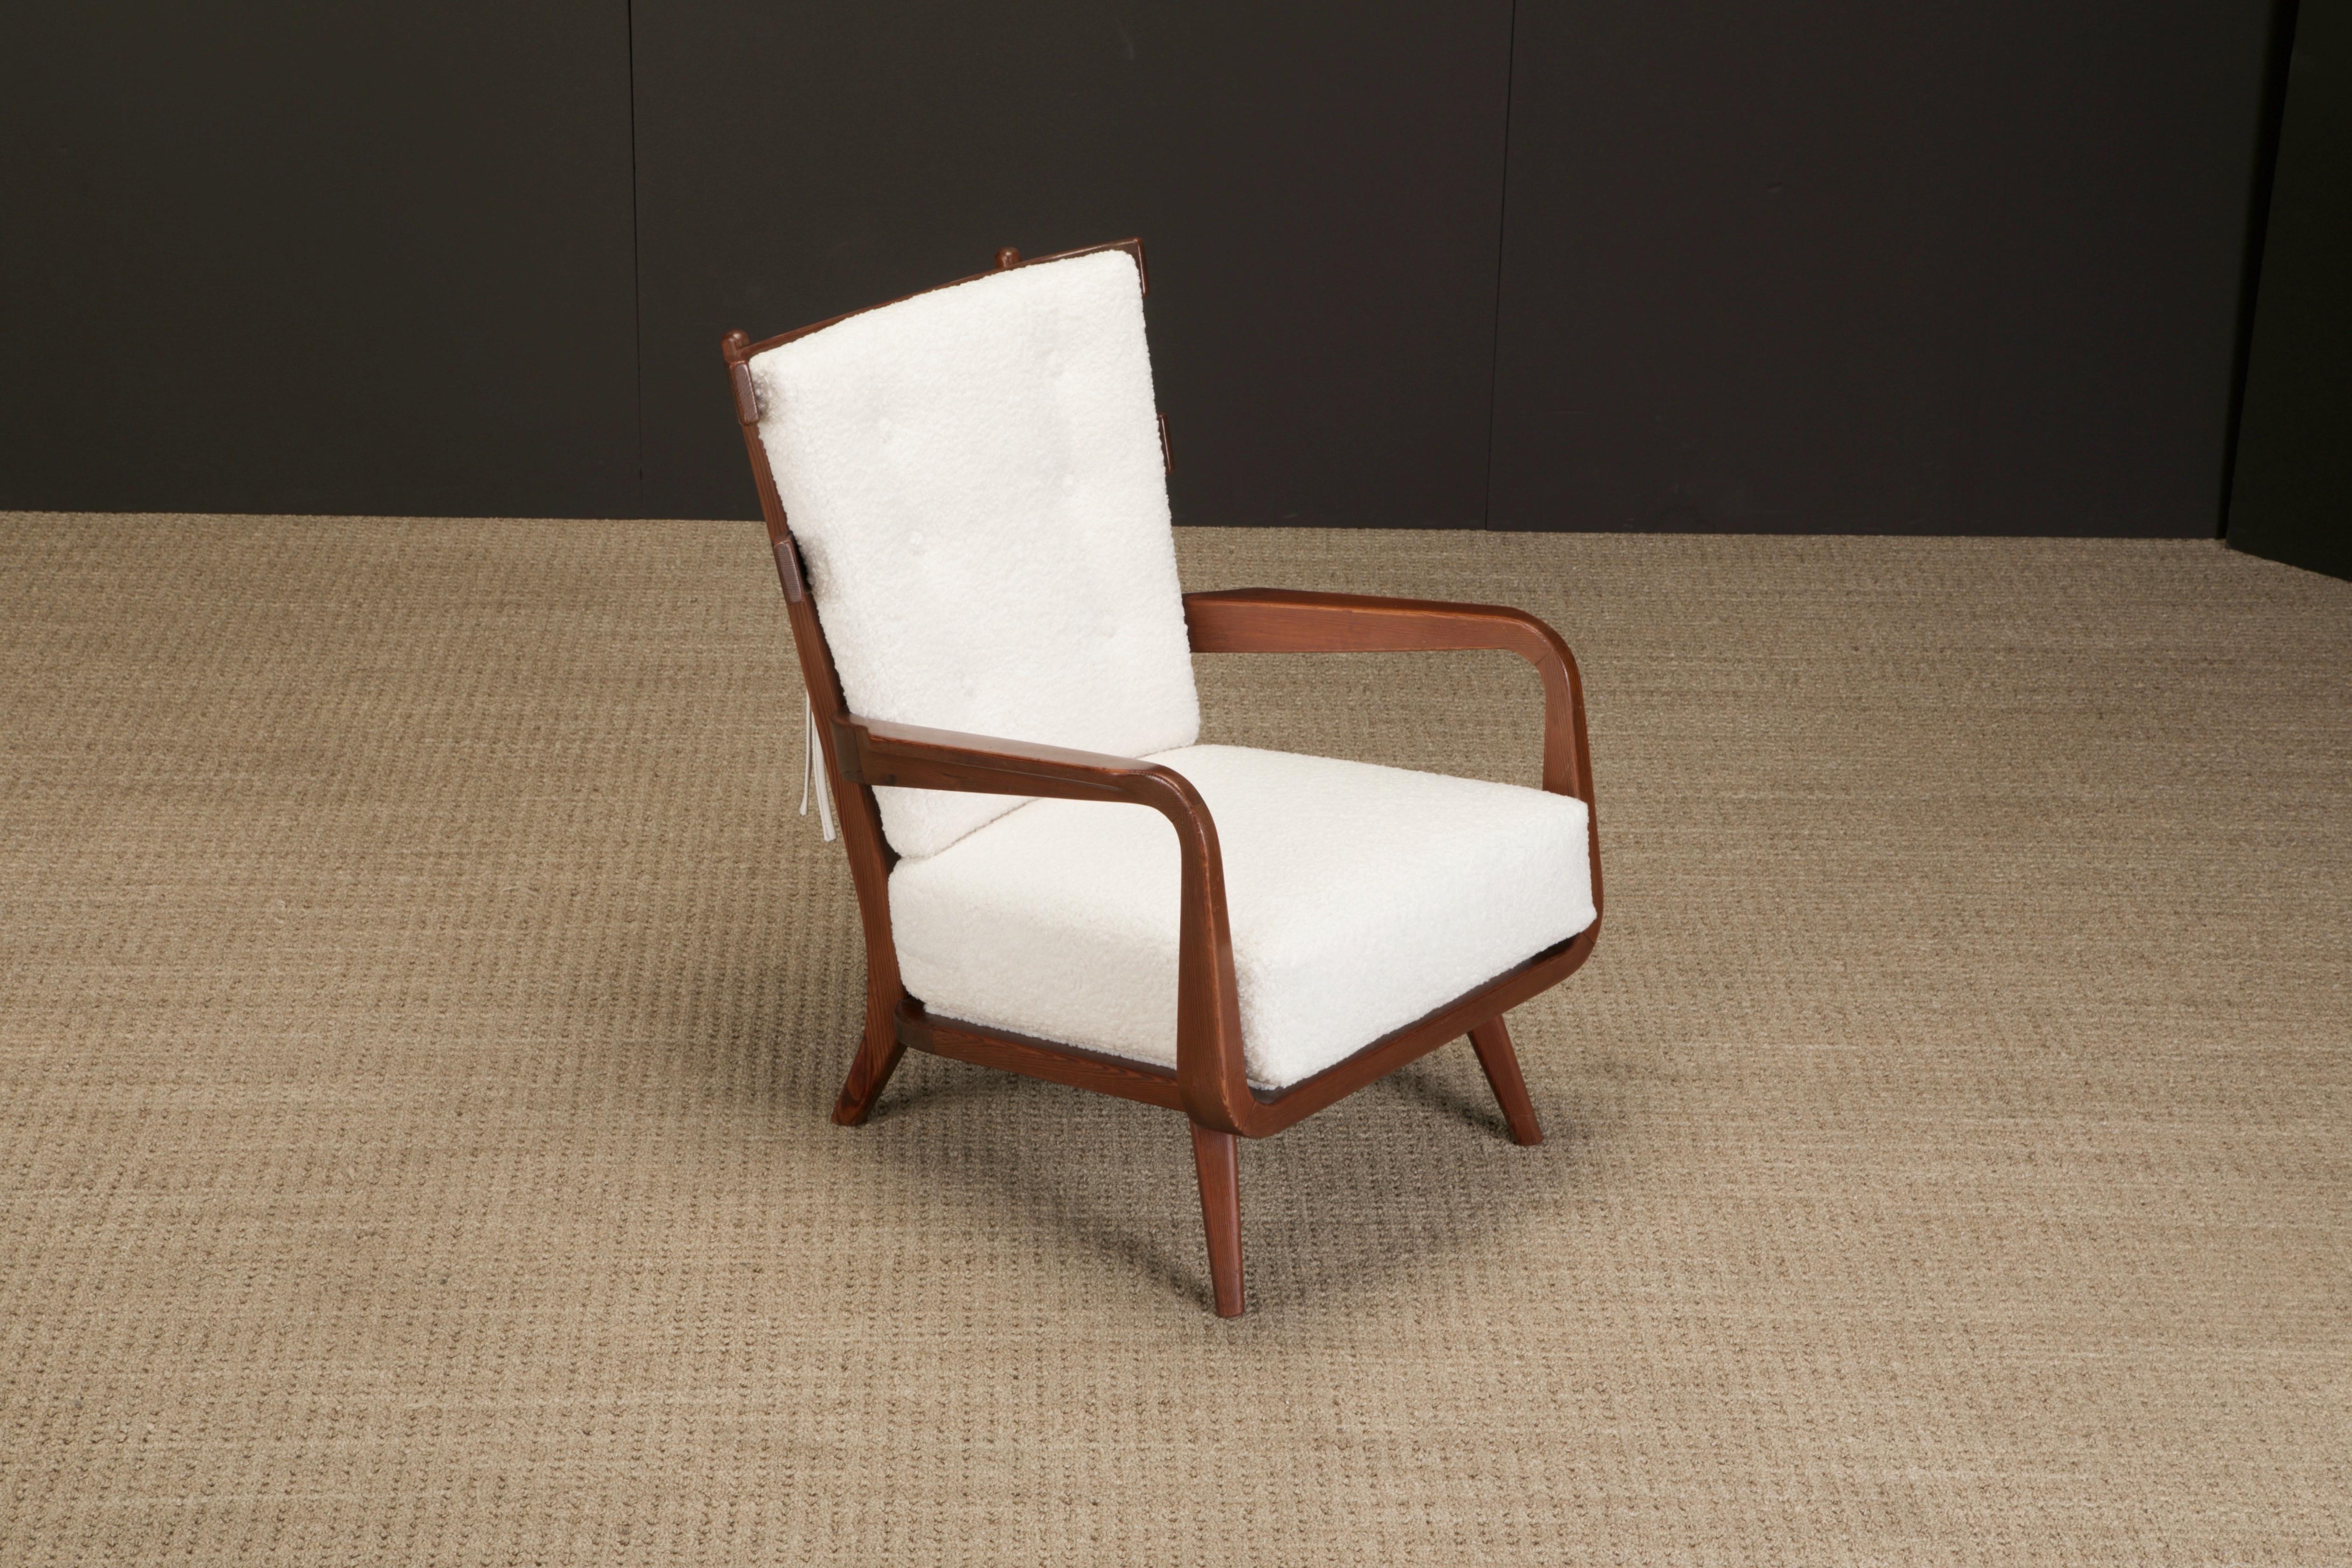 Brazilian Giuseppe Scapinelli Sculptural Armchair Reupholstered in White Bouclé, c 1960